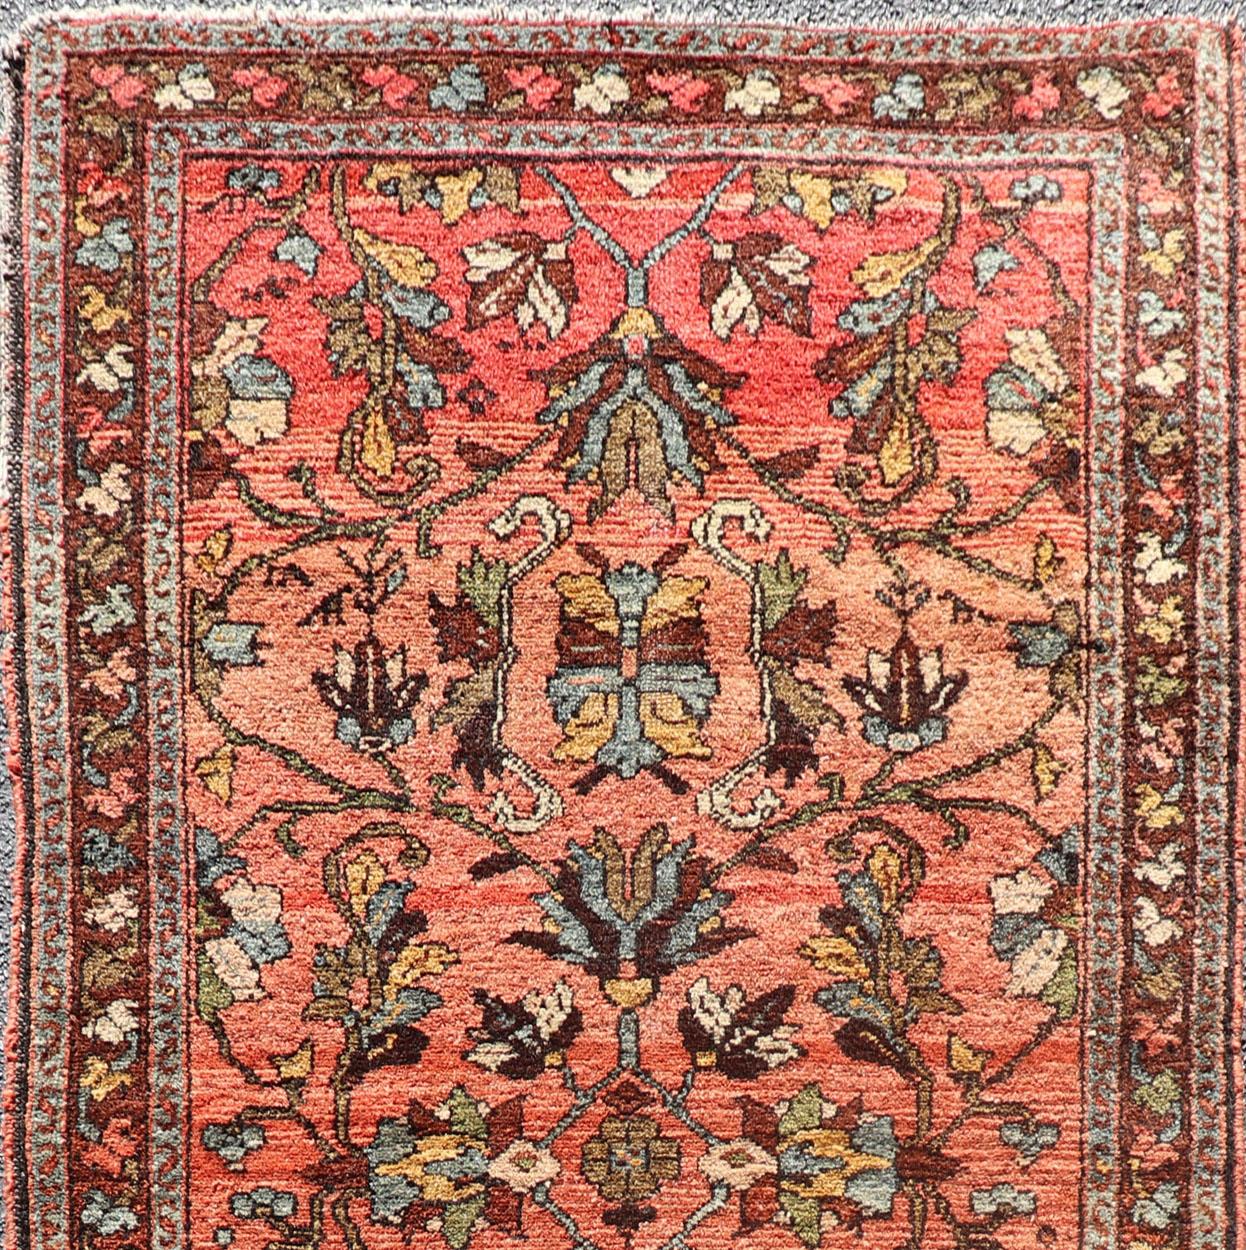 Antique Hamadan rug in sub floral all-over design rug R20-1008, country of origin / Hamadan, circa 1920.

This magnificent Hamadan features beautiful coloration, including tones of orange, yellow, and chocolate brown. The border consists of a